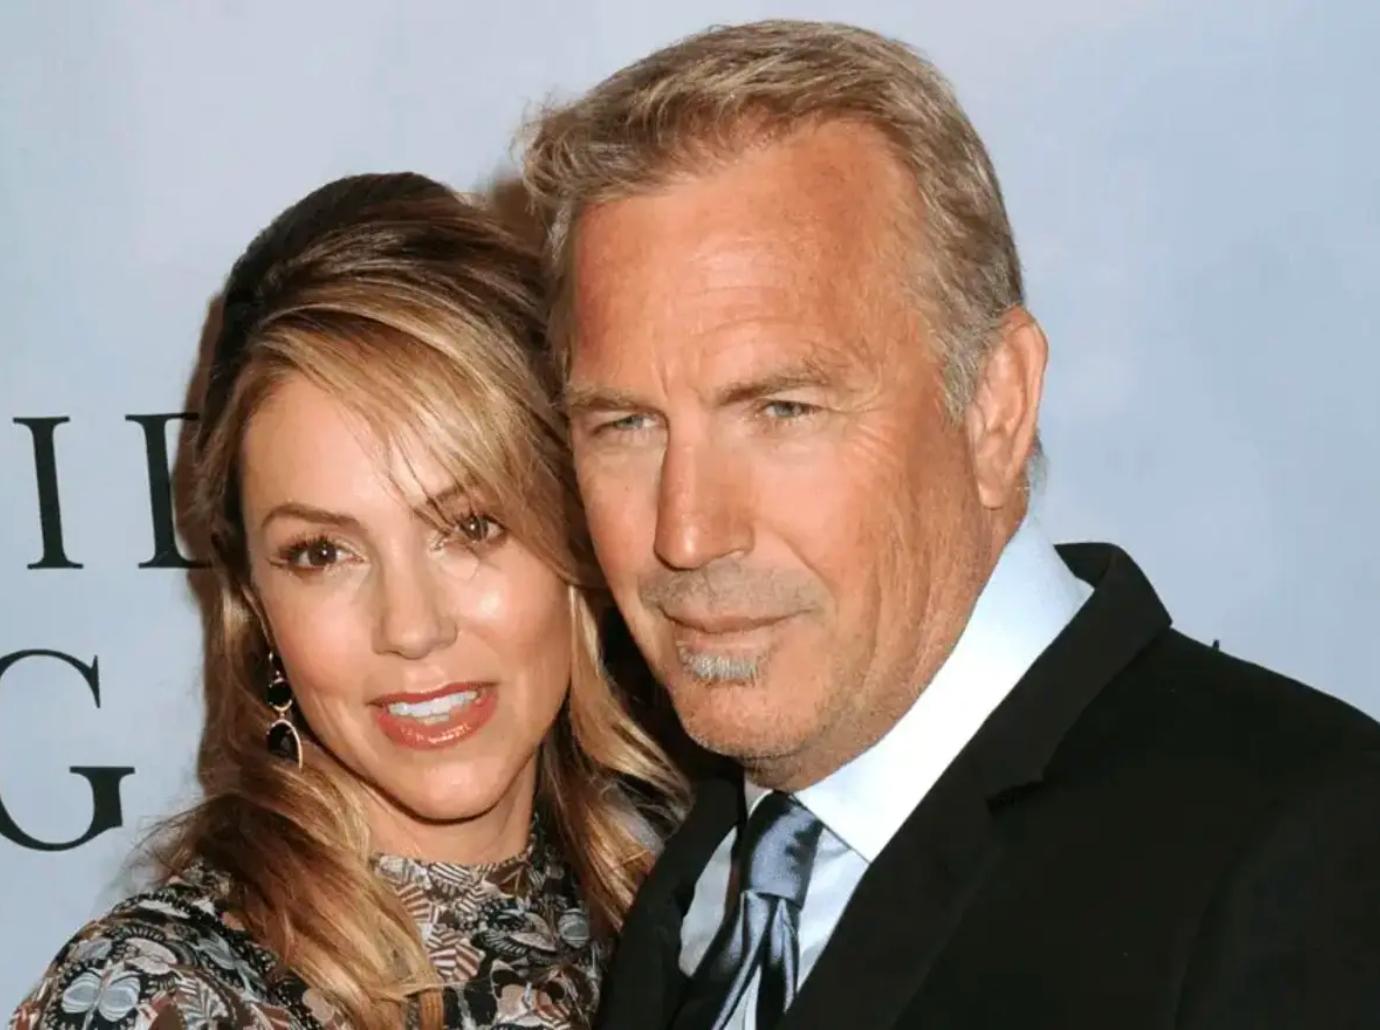 Kevin Costner's estranged wife ditches wedding ring amid divorce